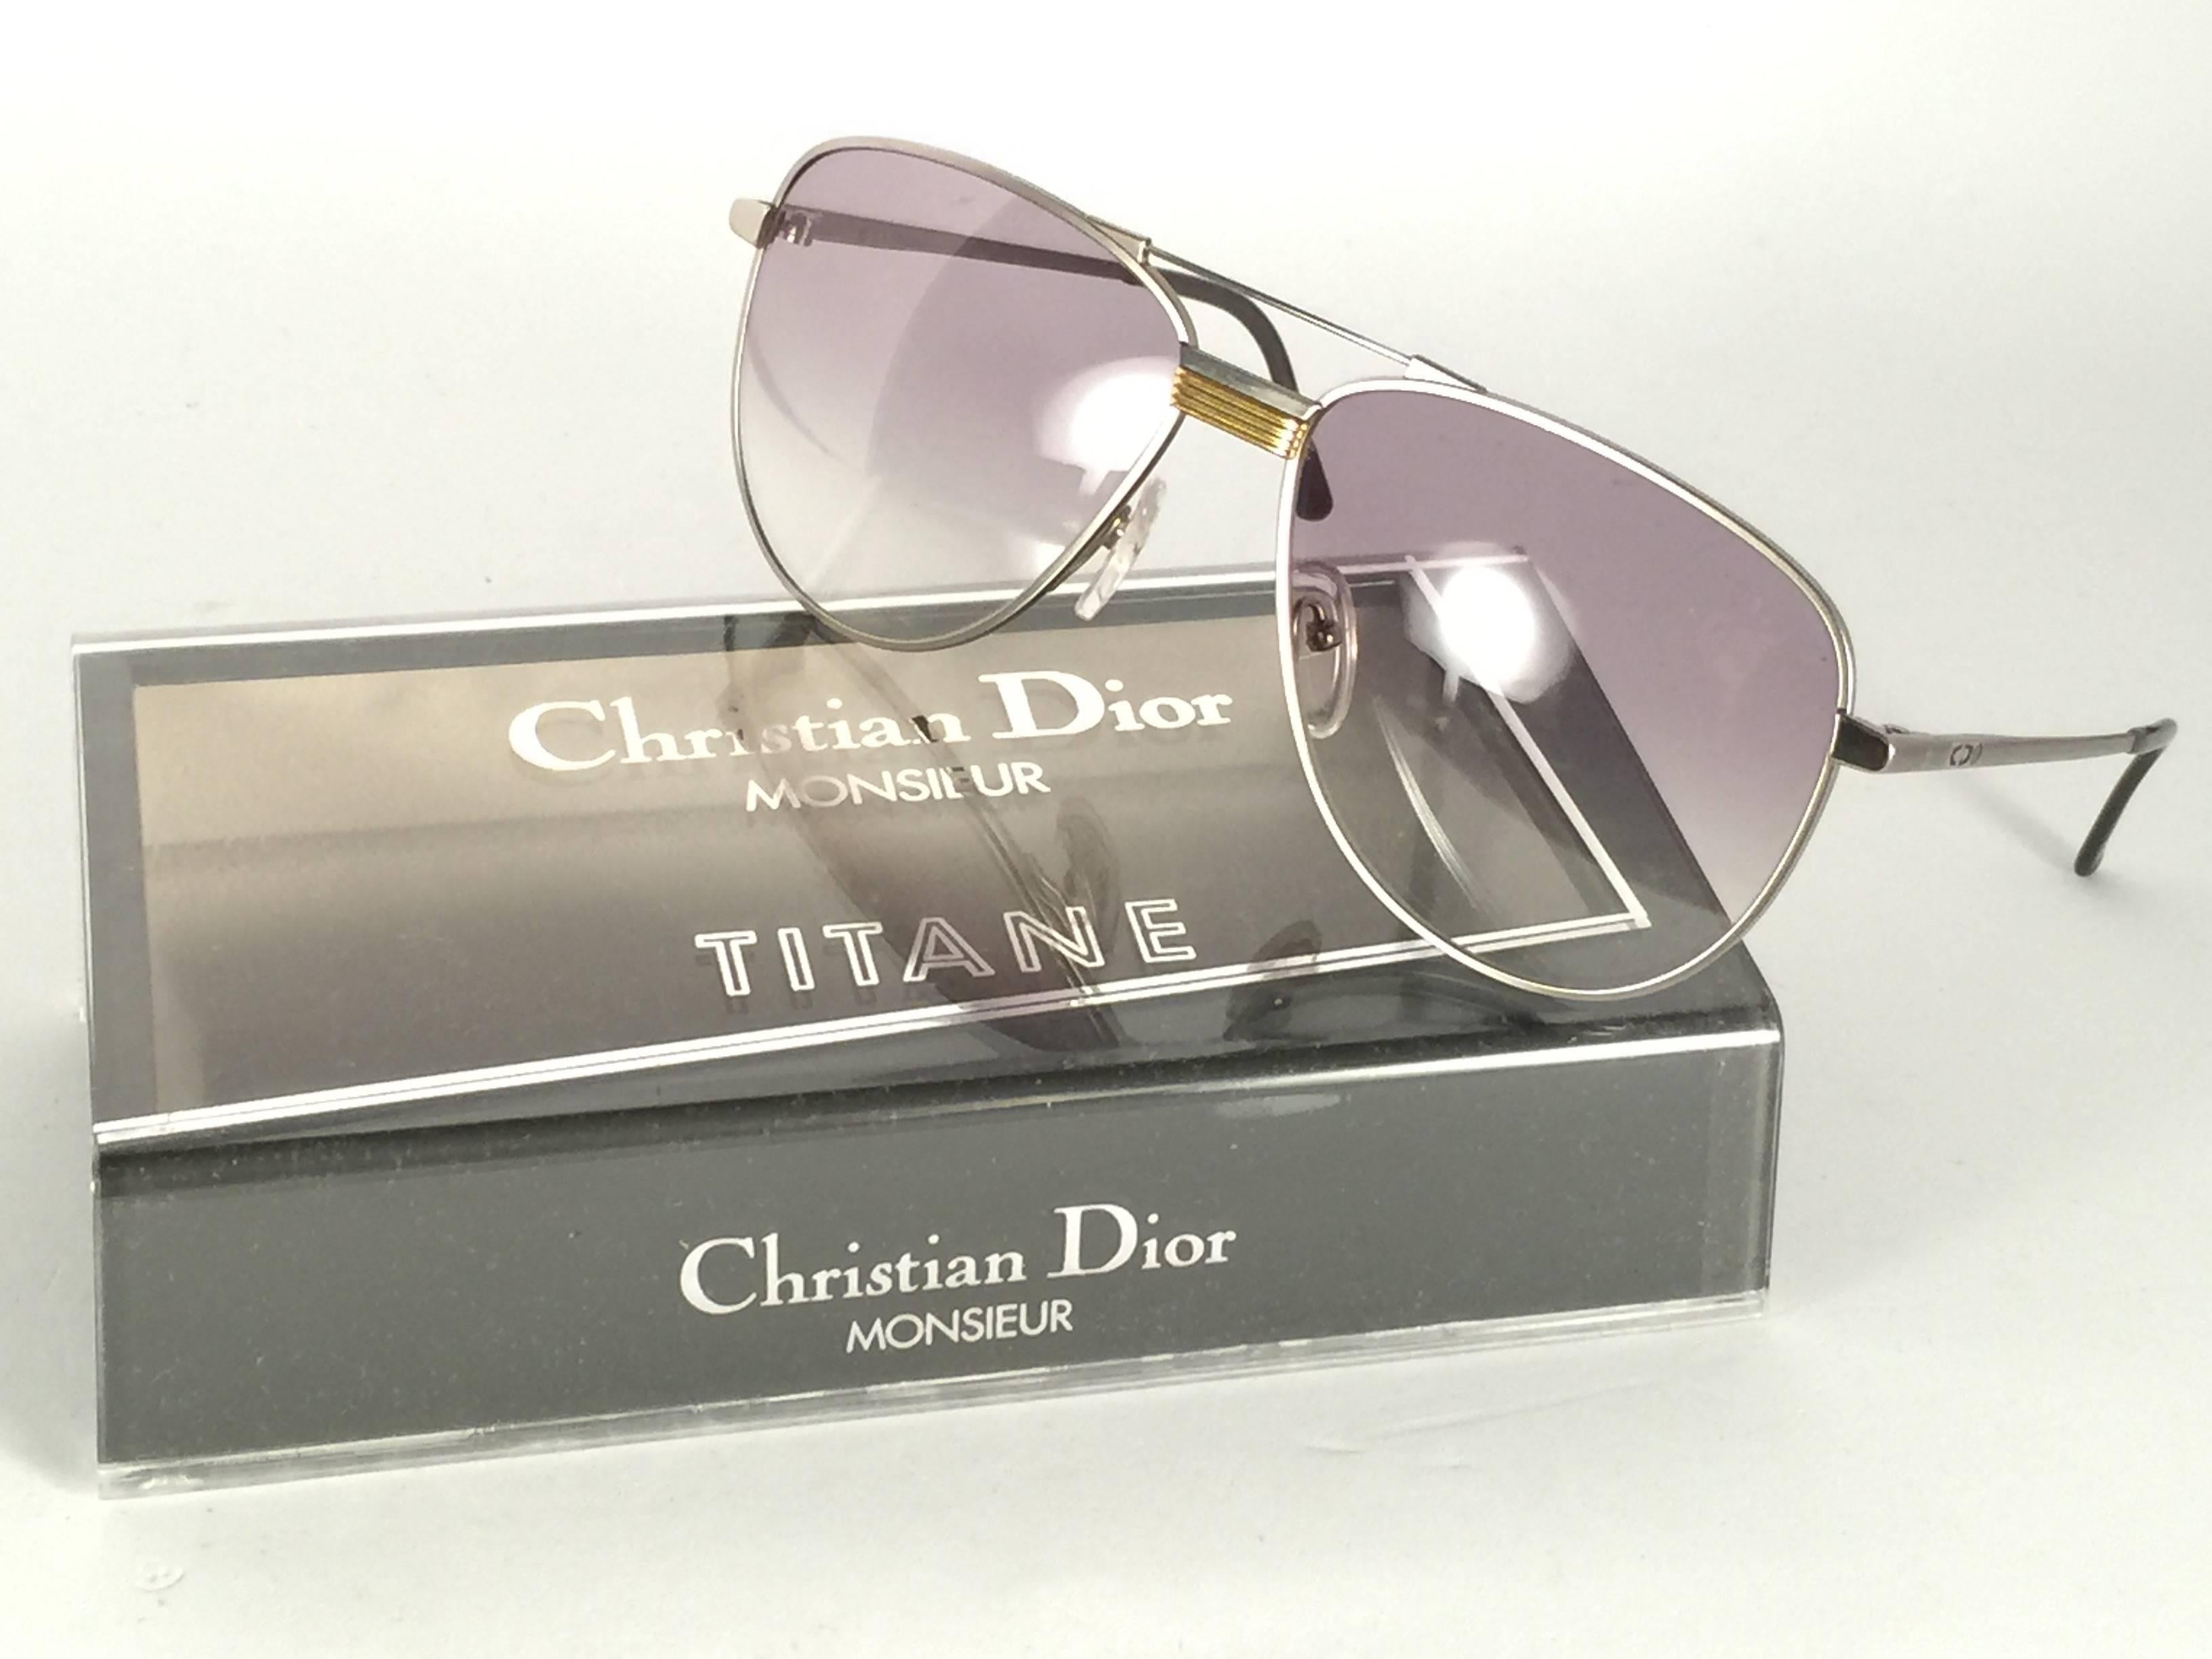 New Vintage Christian Dior Monsieur Titanium.

Designed and produced in the1980’s.  

Made by Optyl. Manufactured in Germany.   

New! never worn or displayed. Flawless pair!